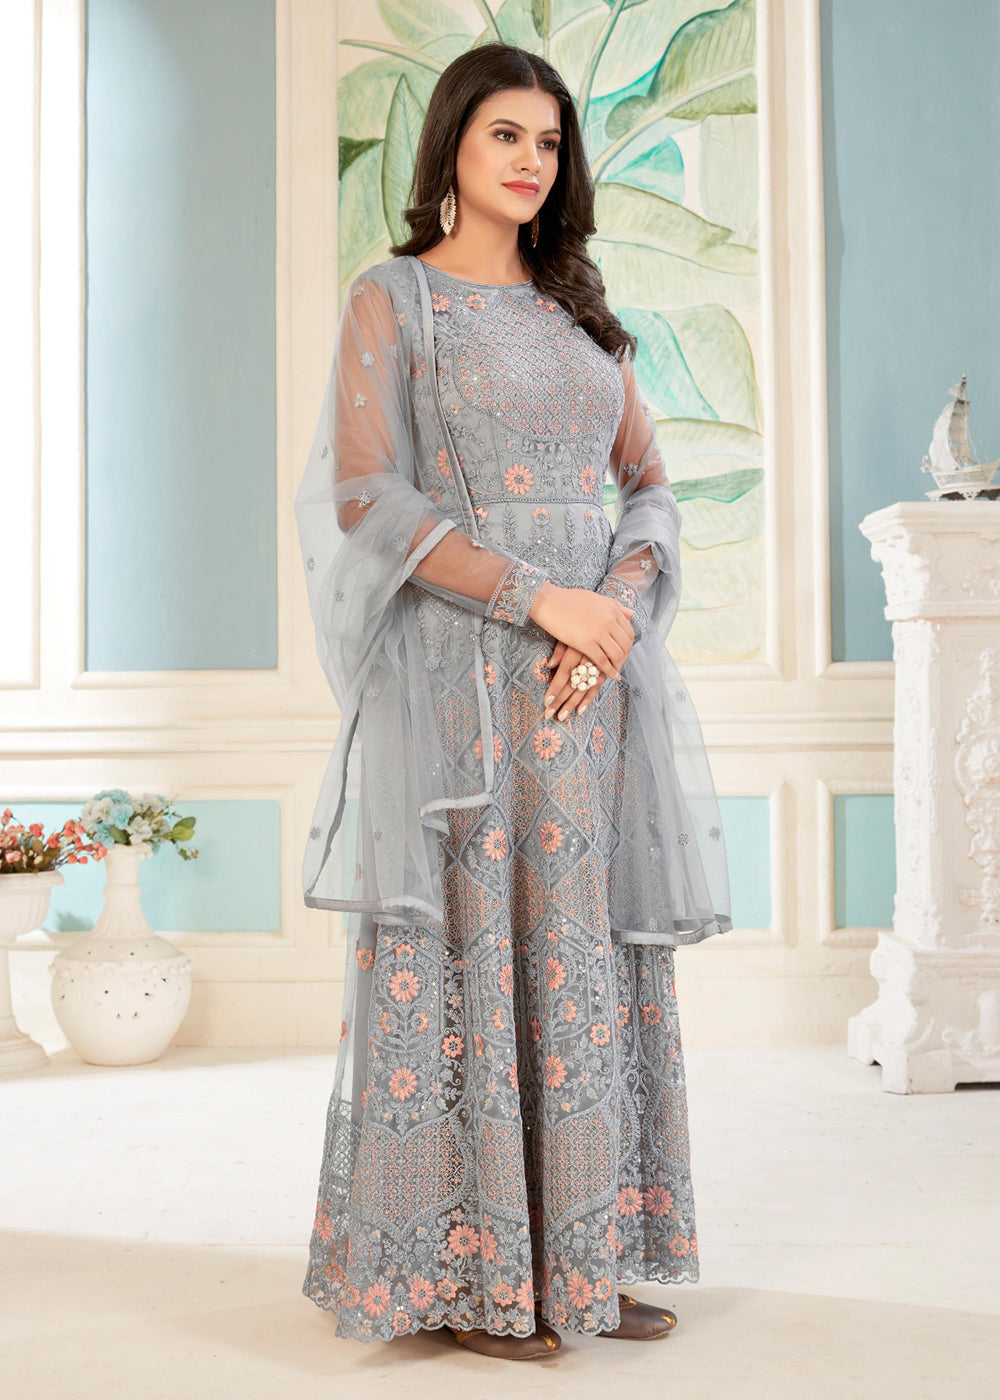 Buy Now Charming Grey Floral Embroidered Wedding Wear Anarkali Suit Online in USA, UK, Australia, New Zealand, Canada & Worldwide at Empress Clothing.